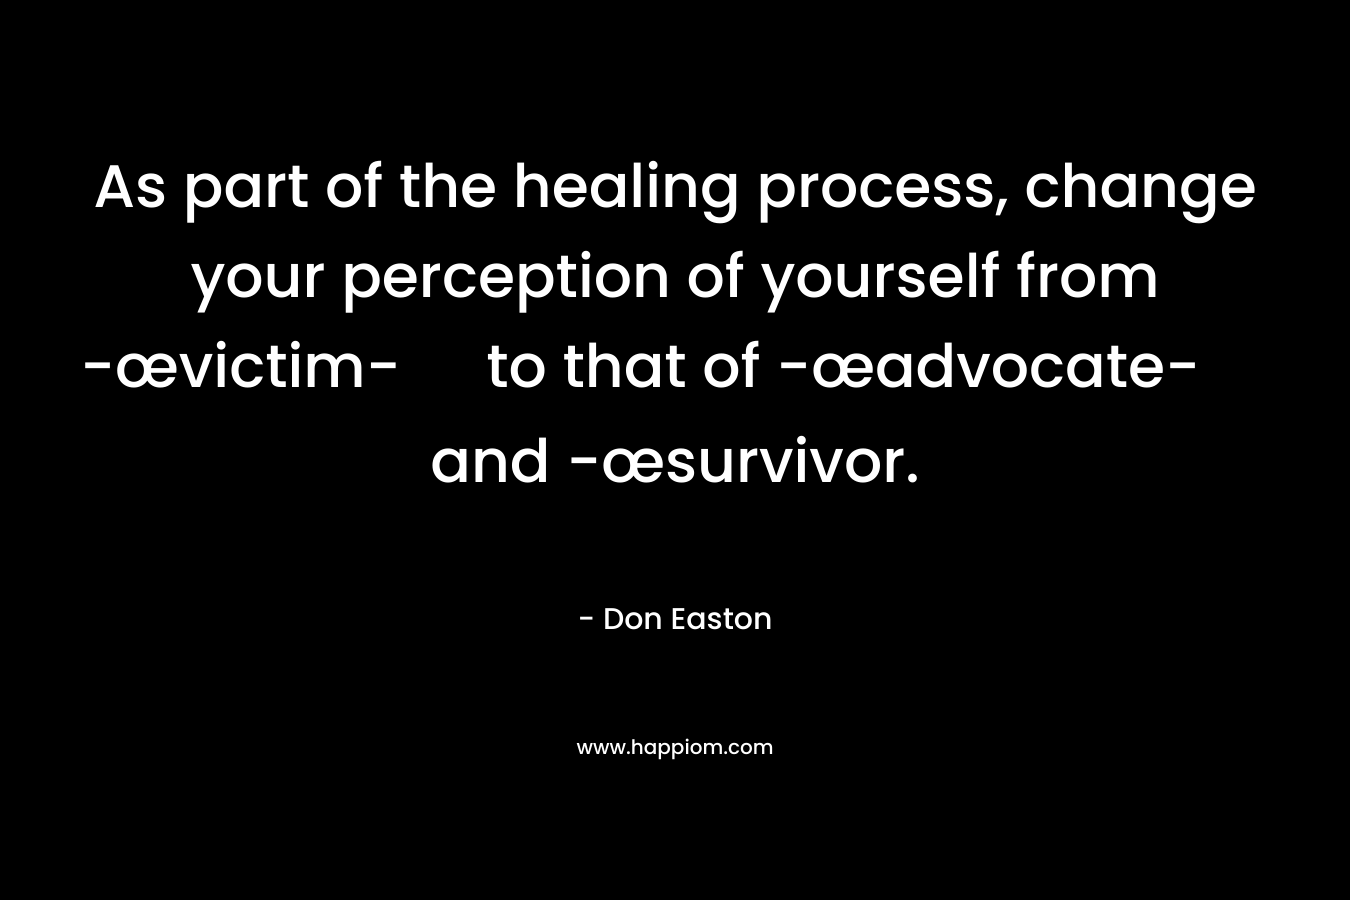 As part of the healing process, change your perception of yourself from -œvictim- to that of -œadvocate- and -œsurvivor. – Don Easton